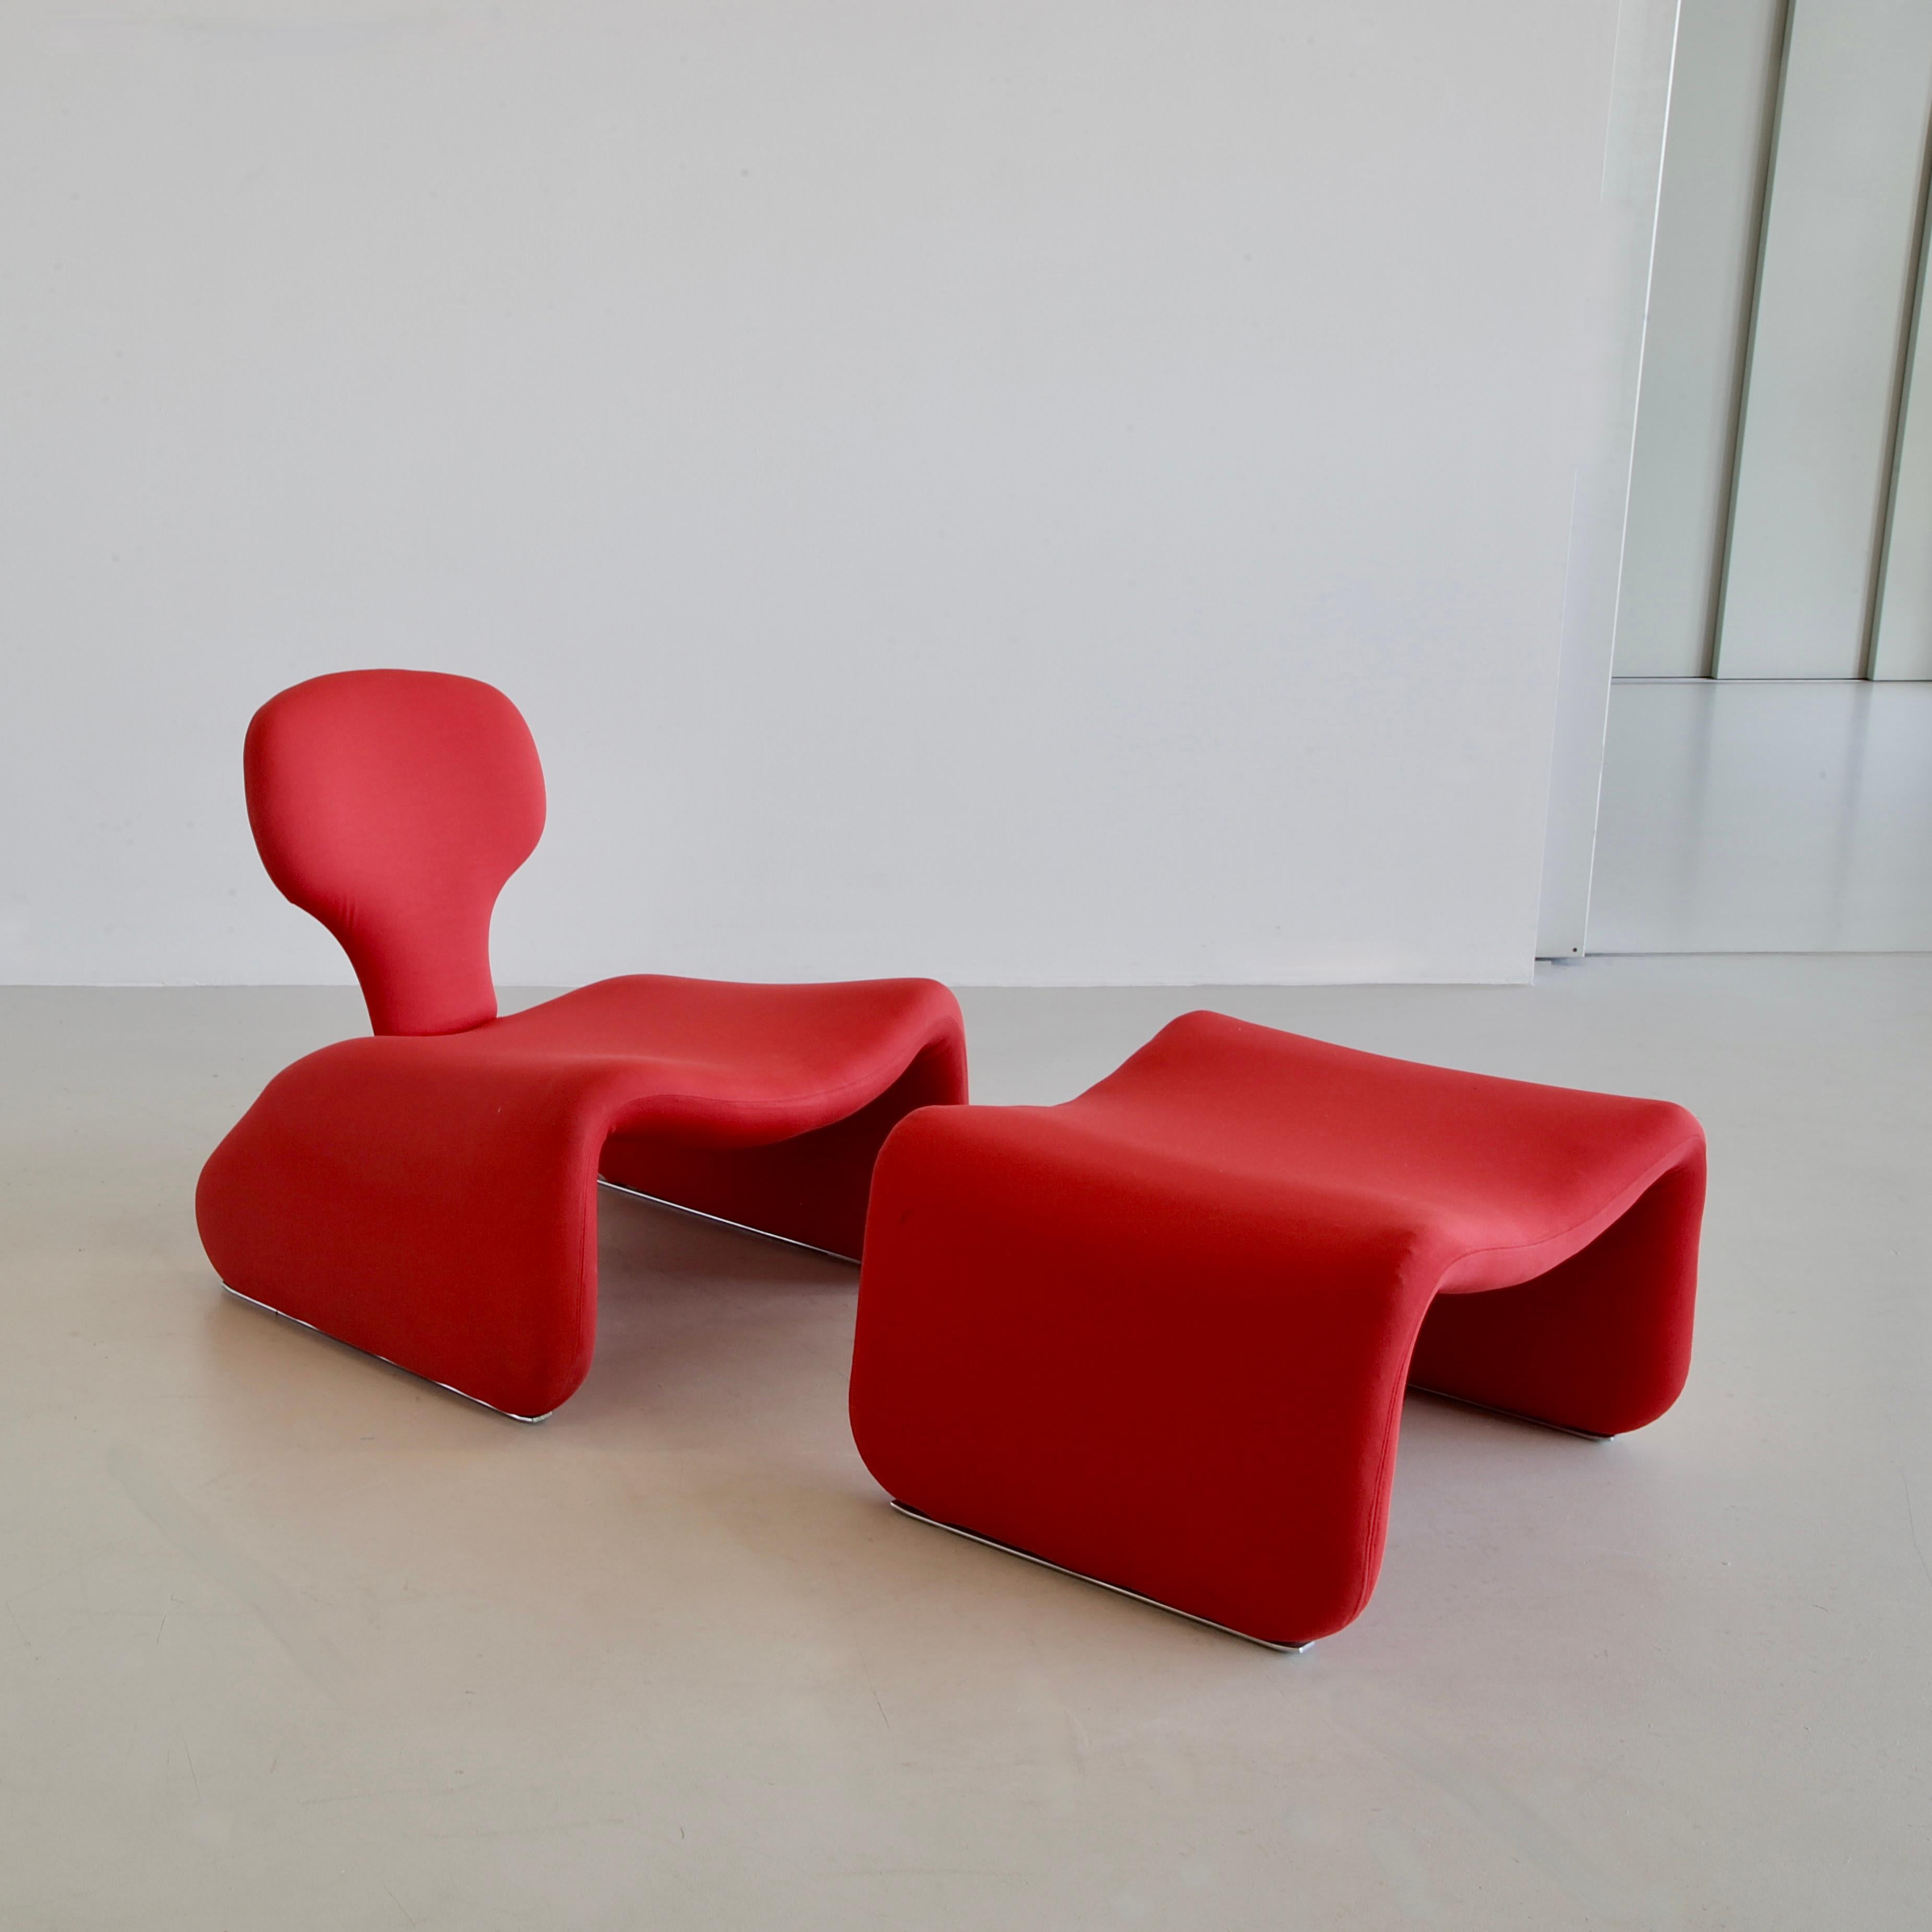 20th Century Dijnn Chair and Footstool, Designed by Olivier Mourgue, France, Airborne, 1965 For Sale